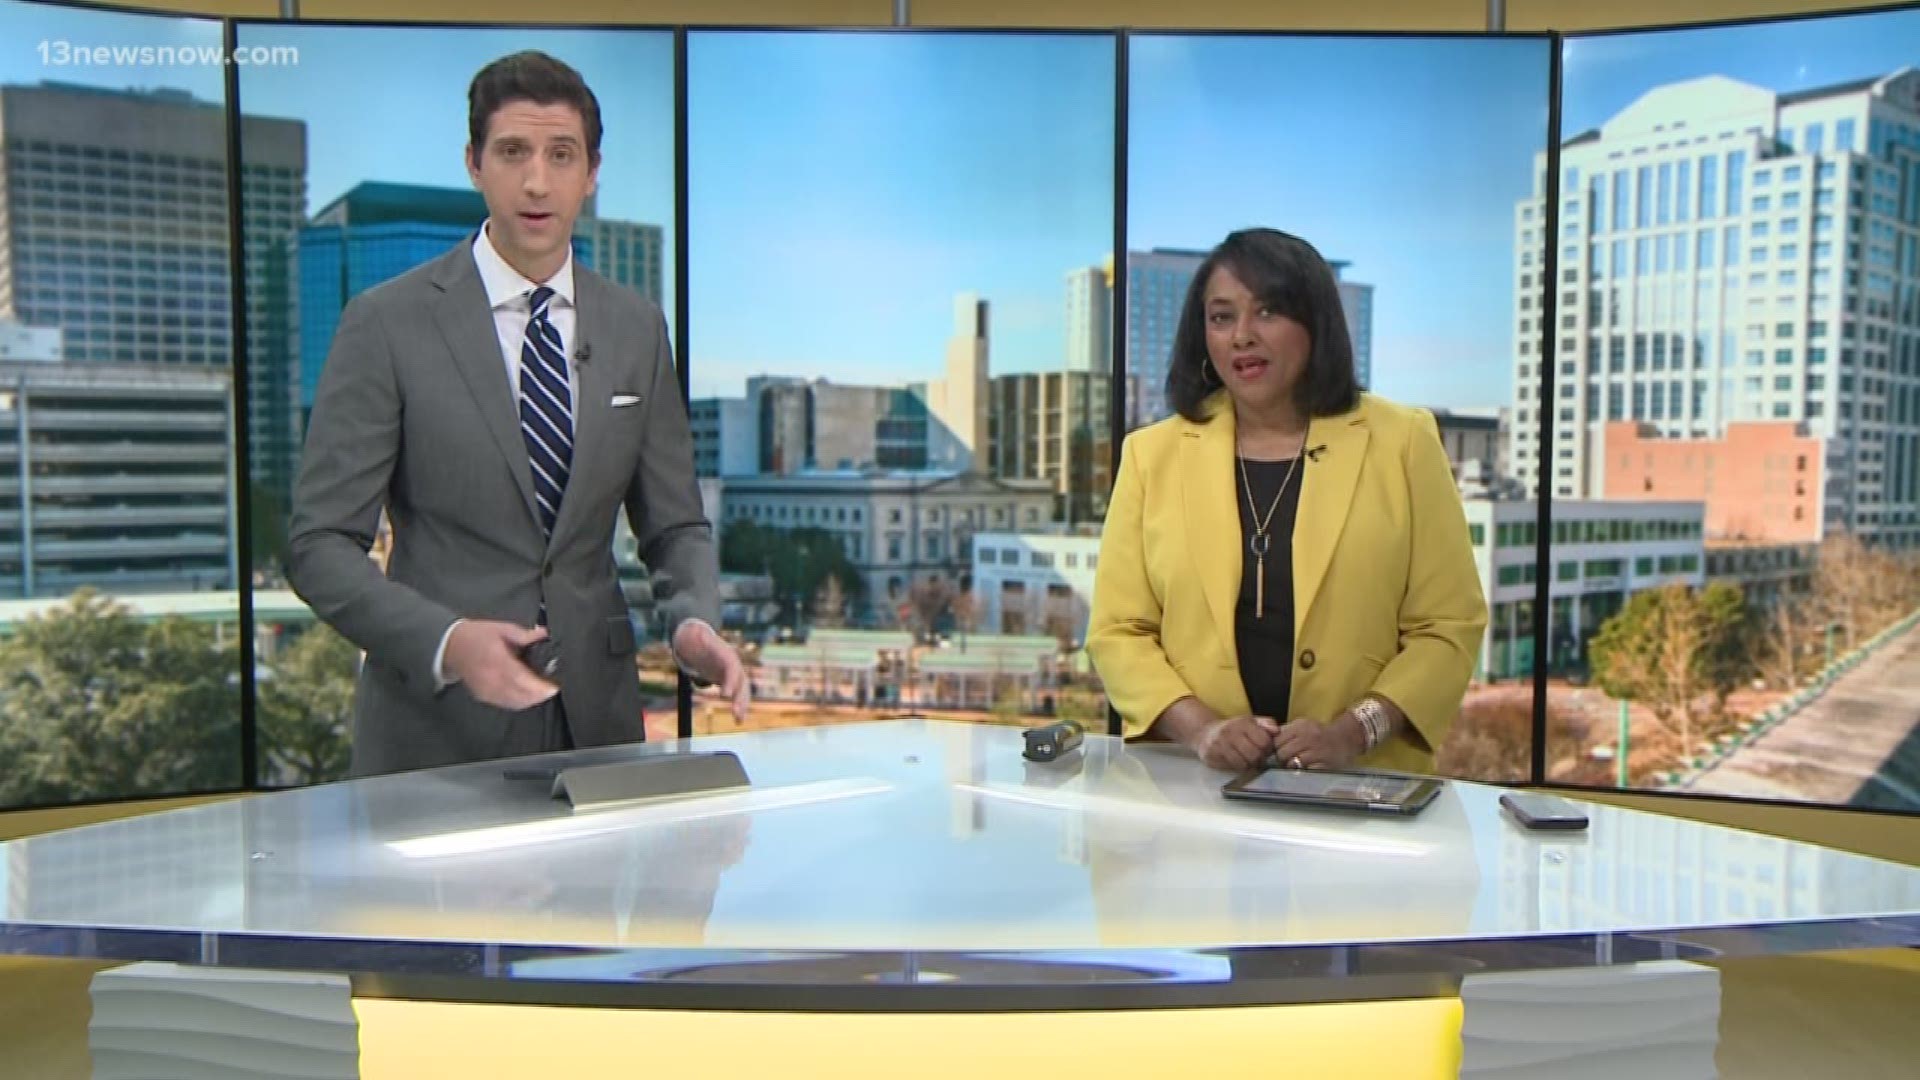 13News Now top headlines at 11 p.m. with Philip Townsend and Janet Roach for December 4.